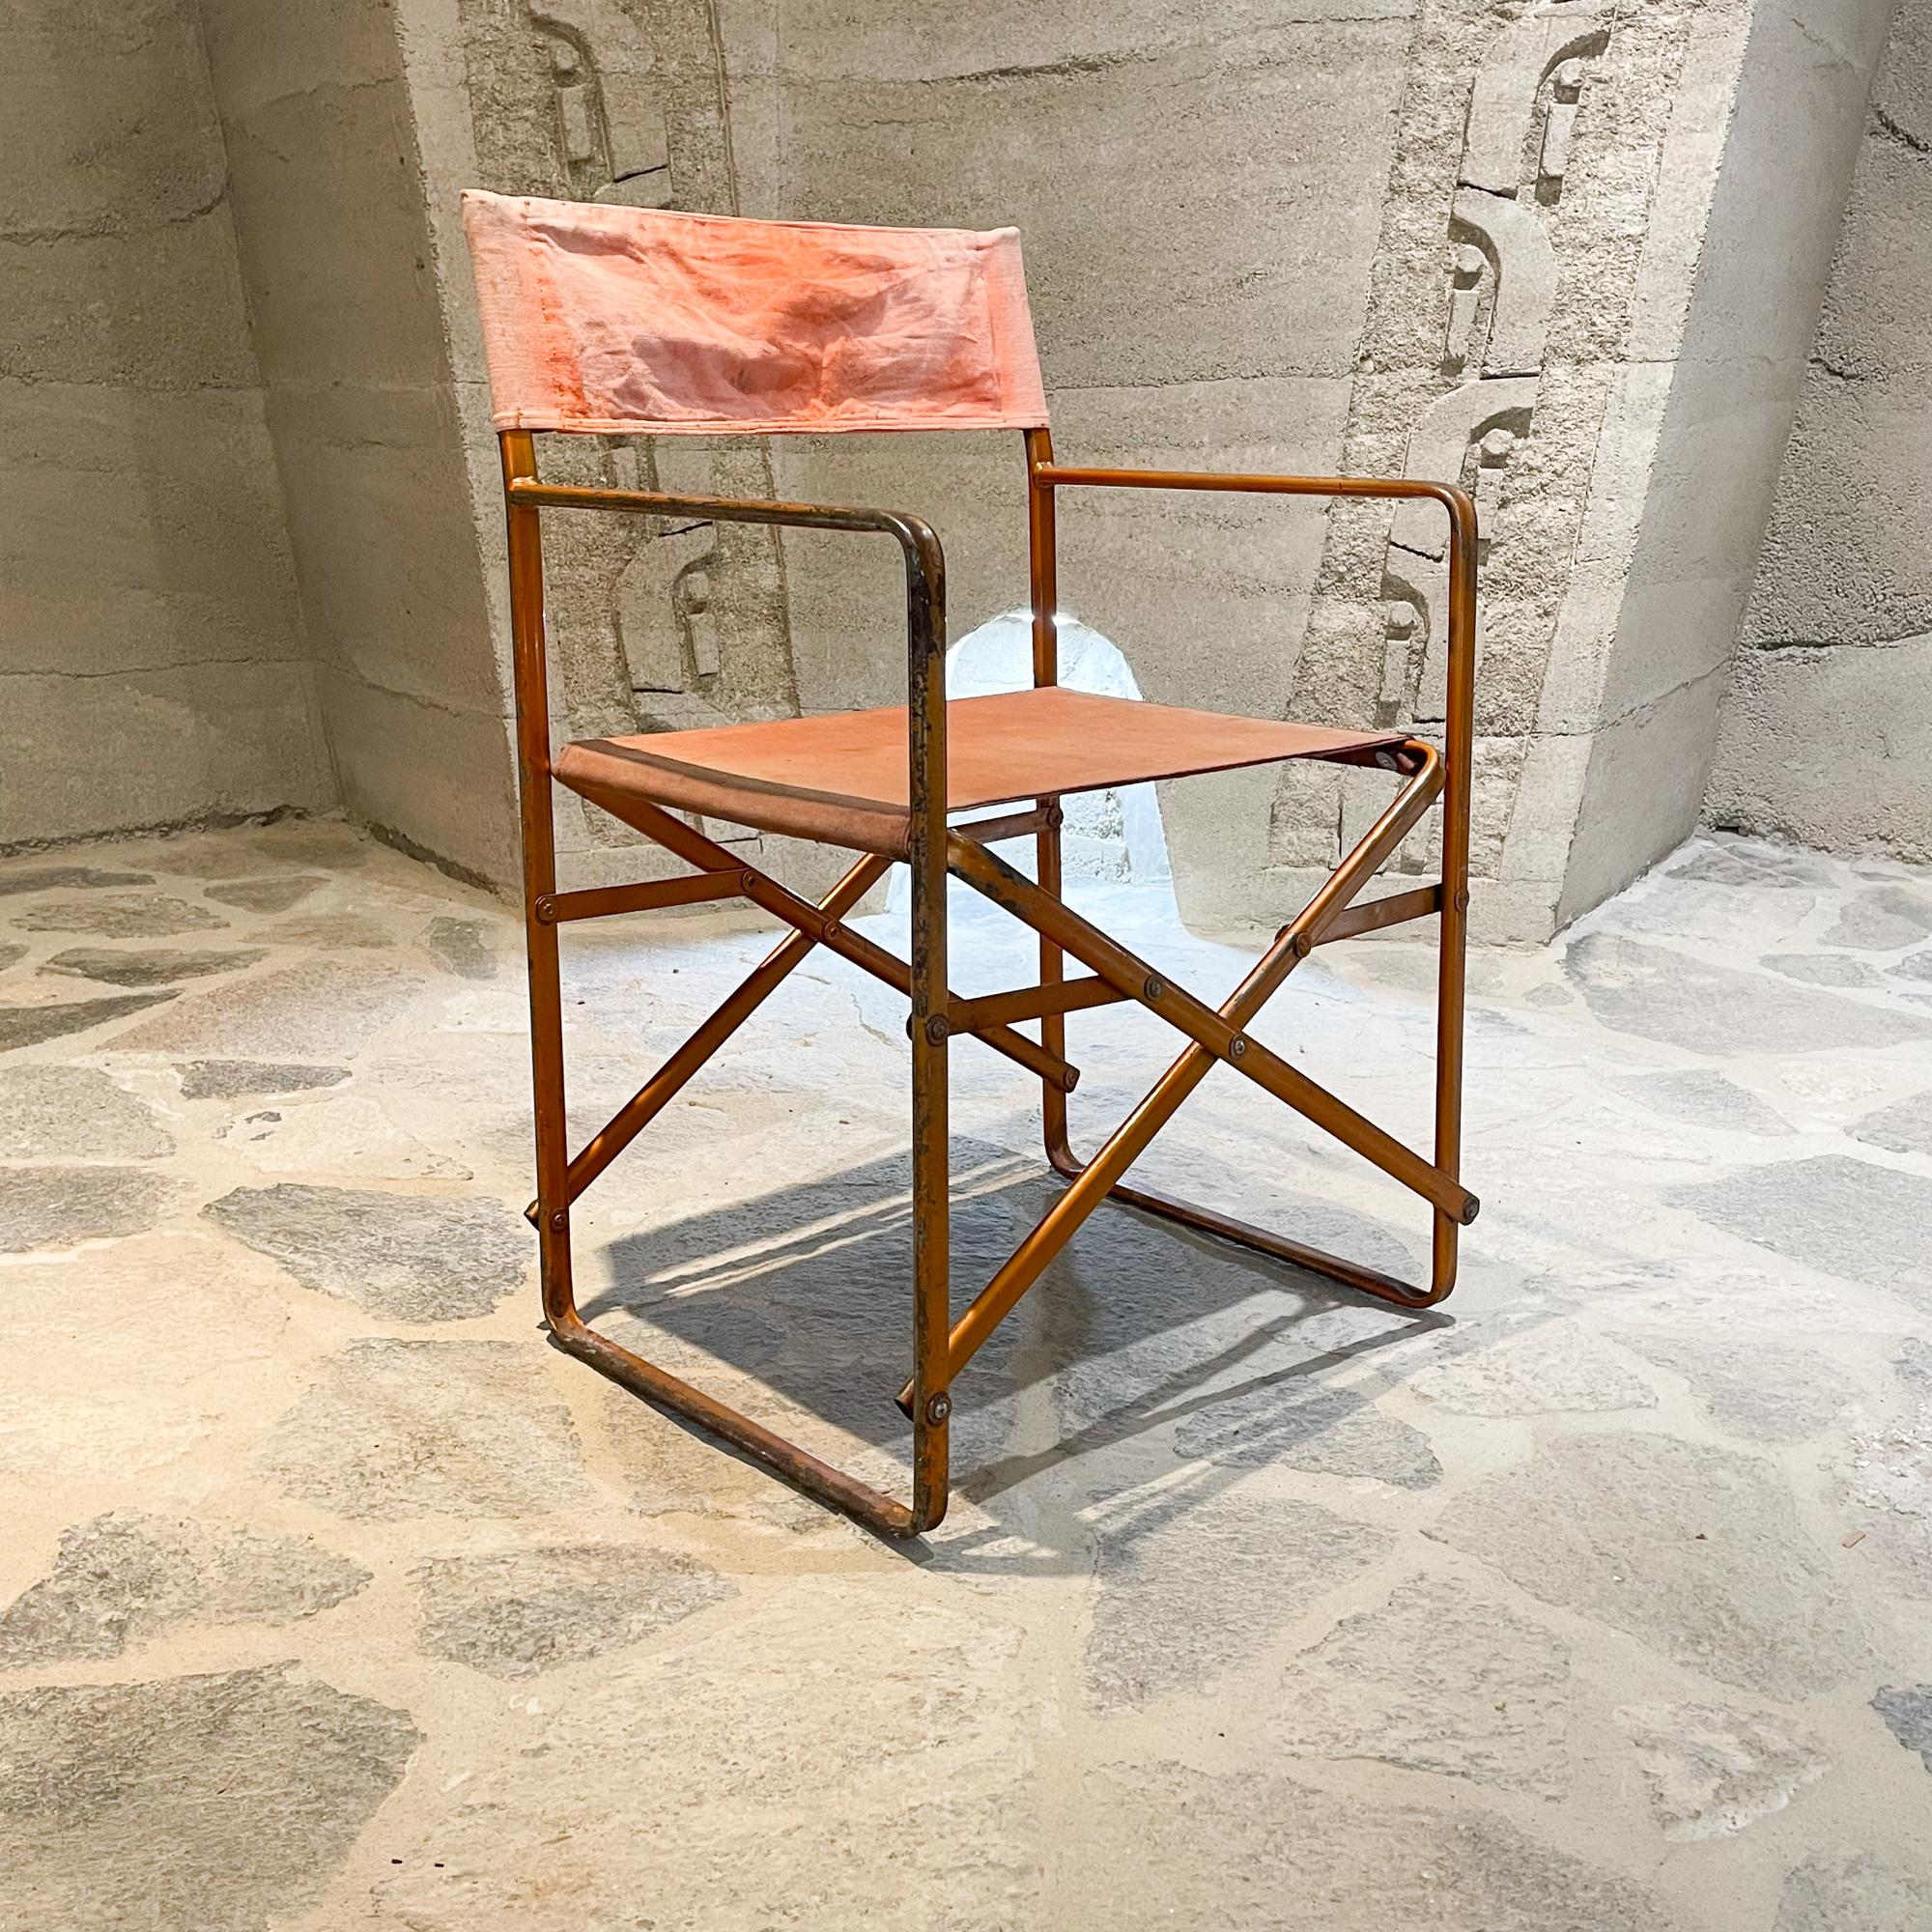 Director's Folding Chair In the style of Gae Aulenti and her folding Zanotta April chair 1964 design, Italy.
Dominant color is orange-rust. Unmarked piece. No maker label present. Made in Metal and Canvas.
Original unrestored fair vintage